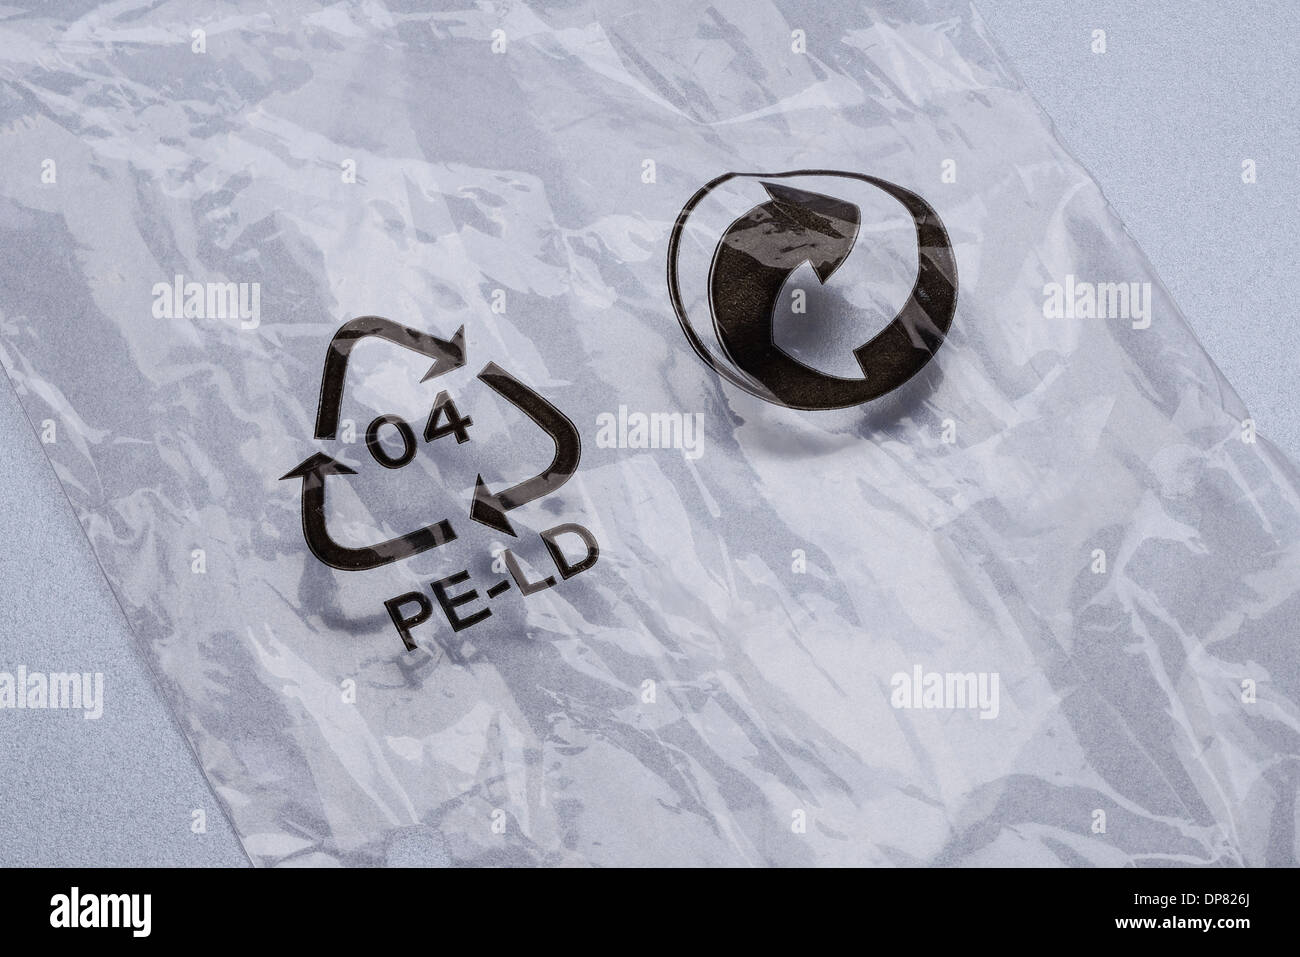 Piece of polythene with a recycling logo printed onto the surface Stock Photo